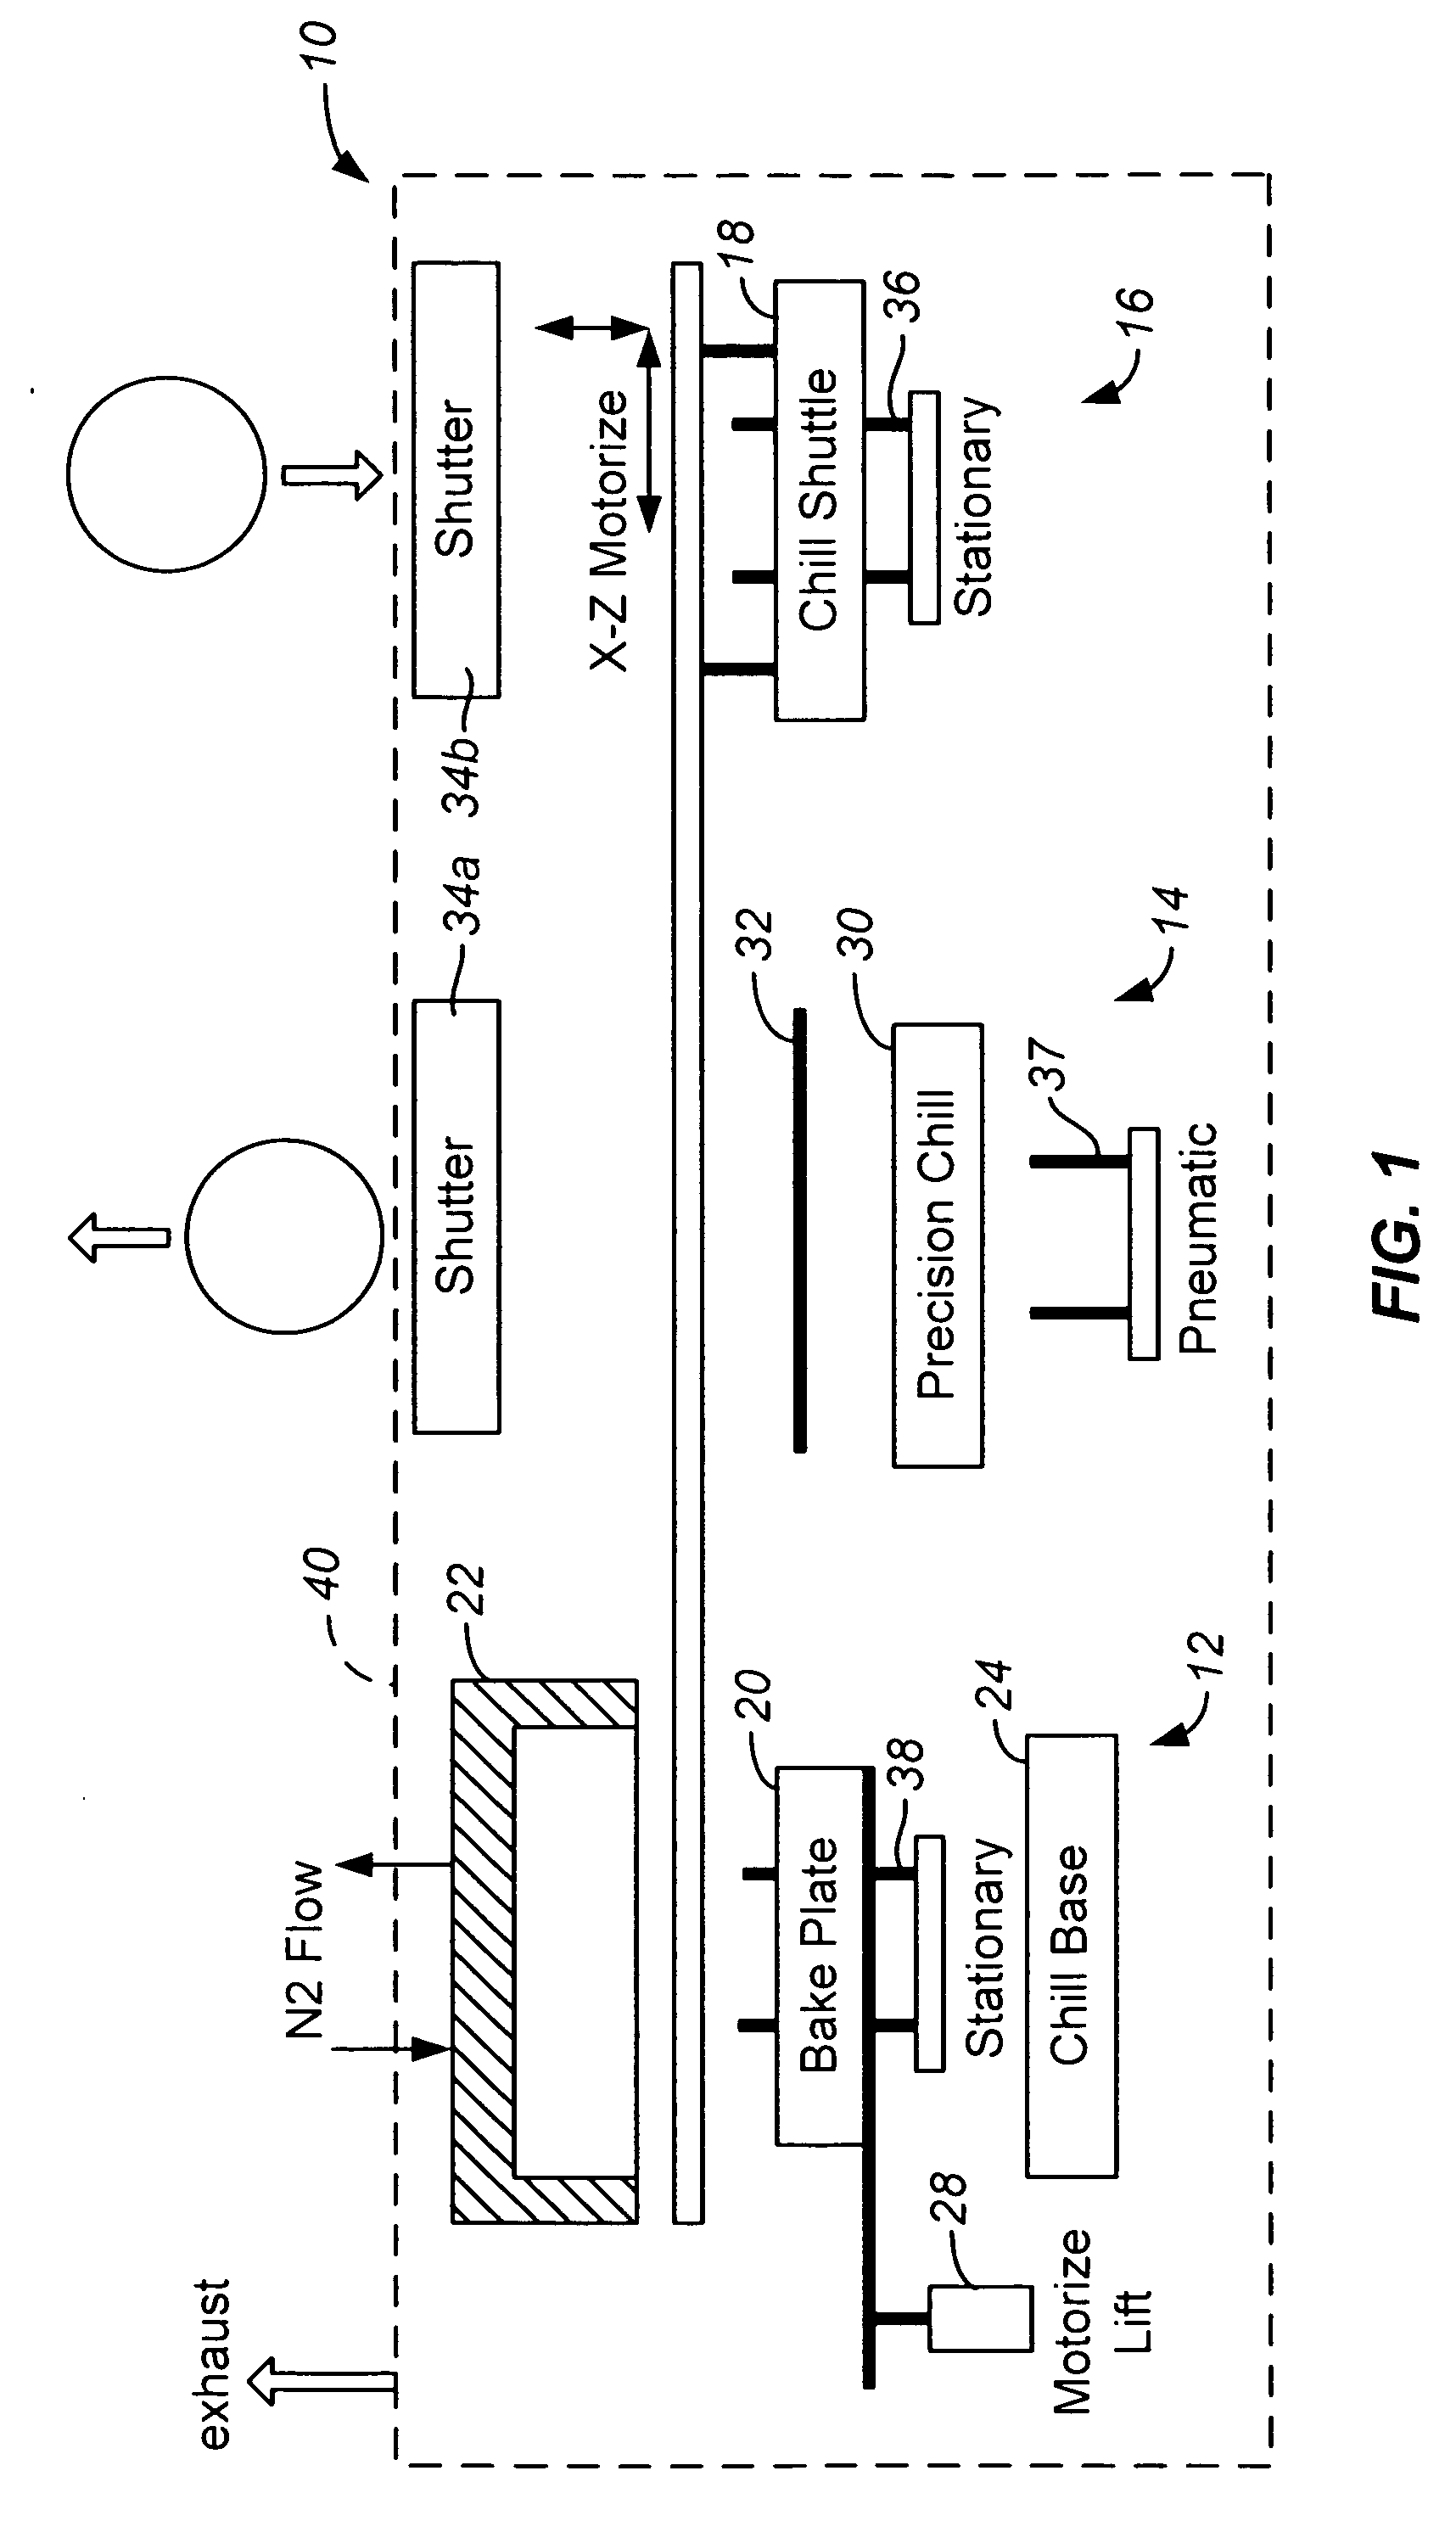 Integrated thermal unit having laterally adjacent bake and chill plates on different planes